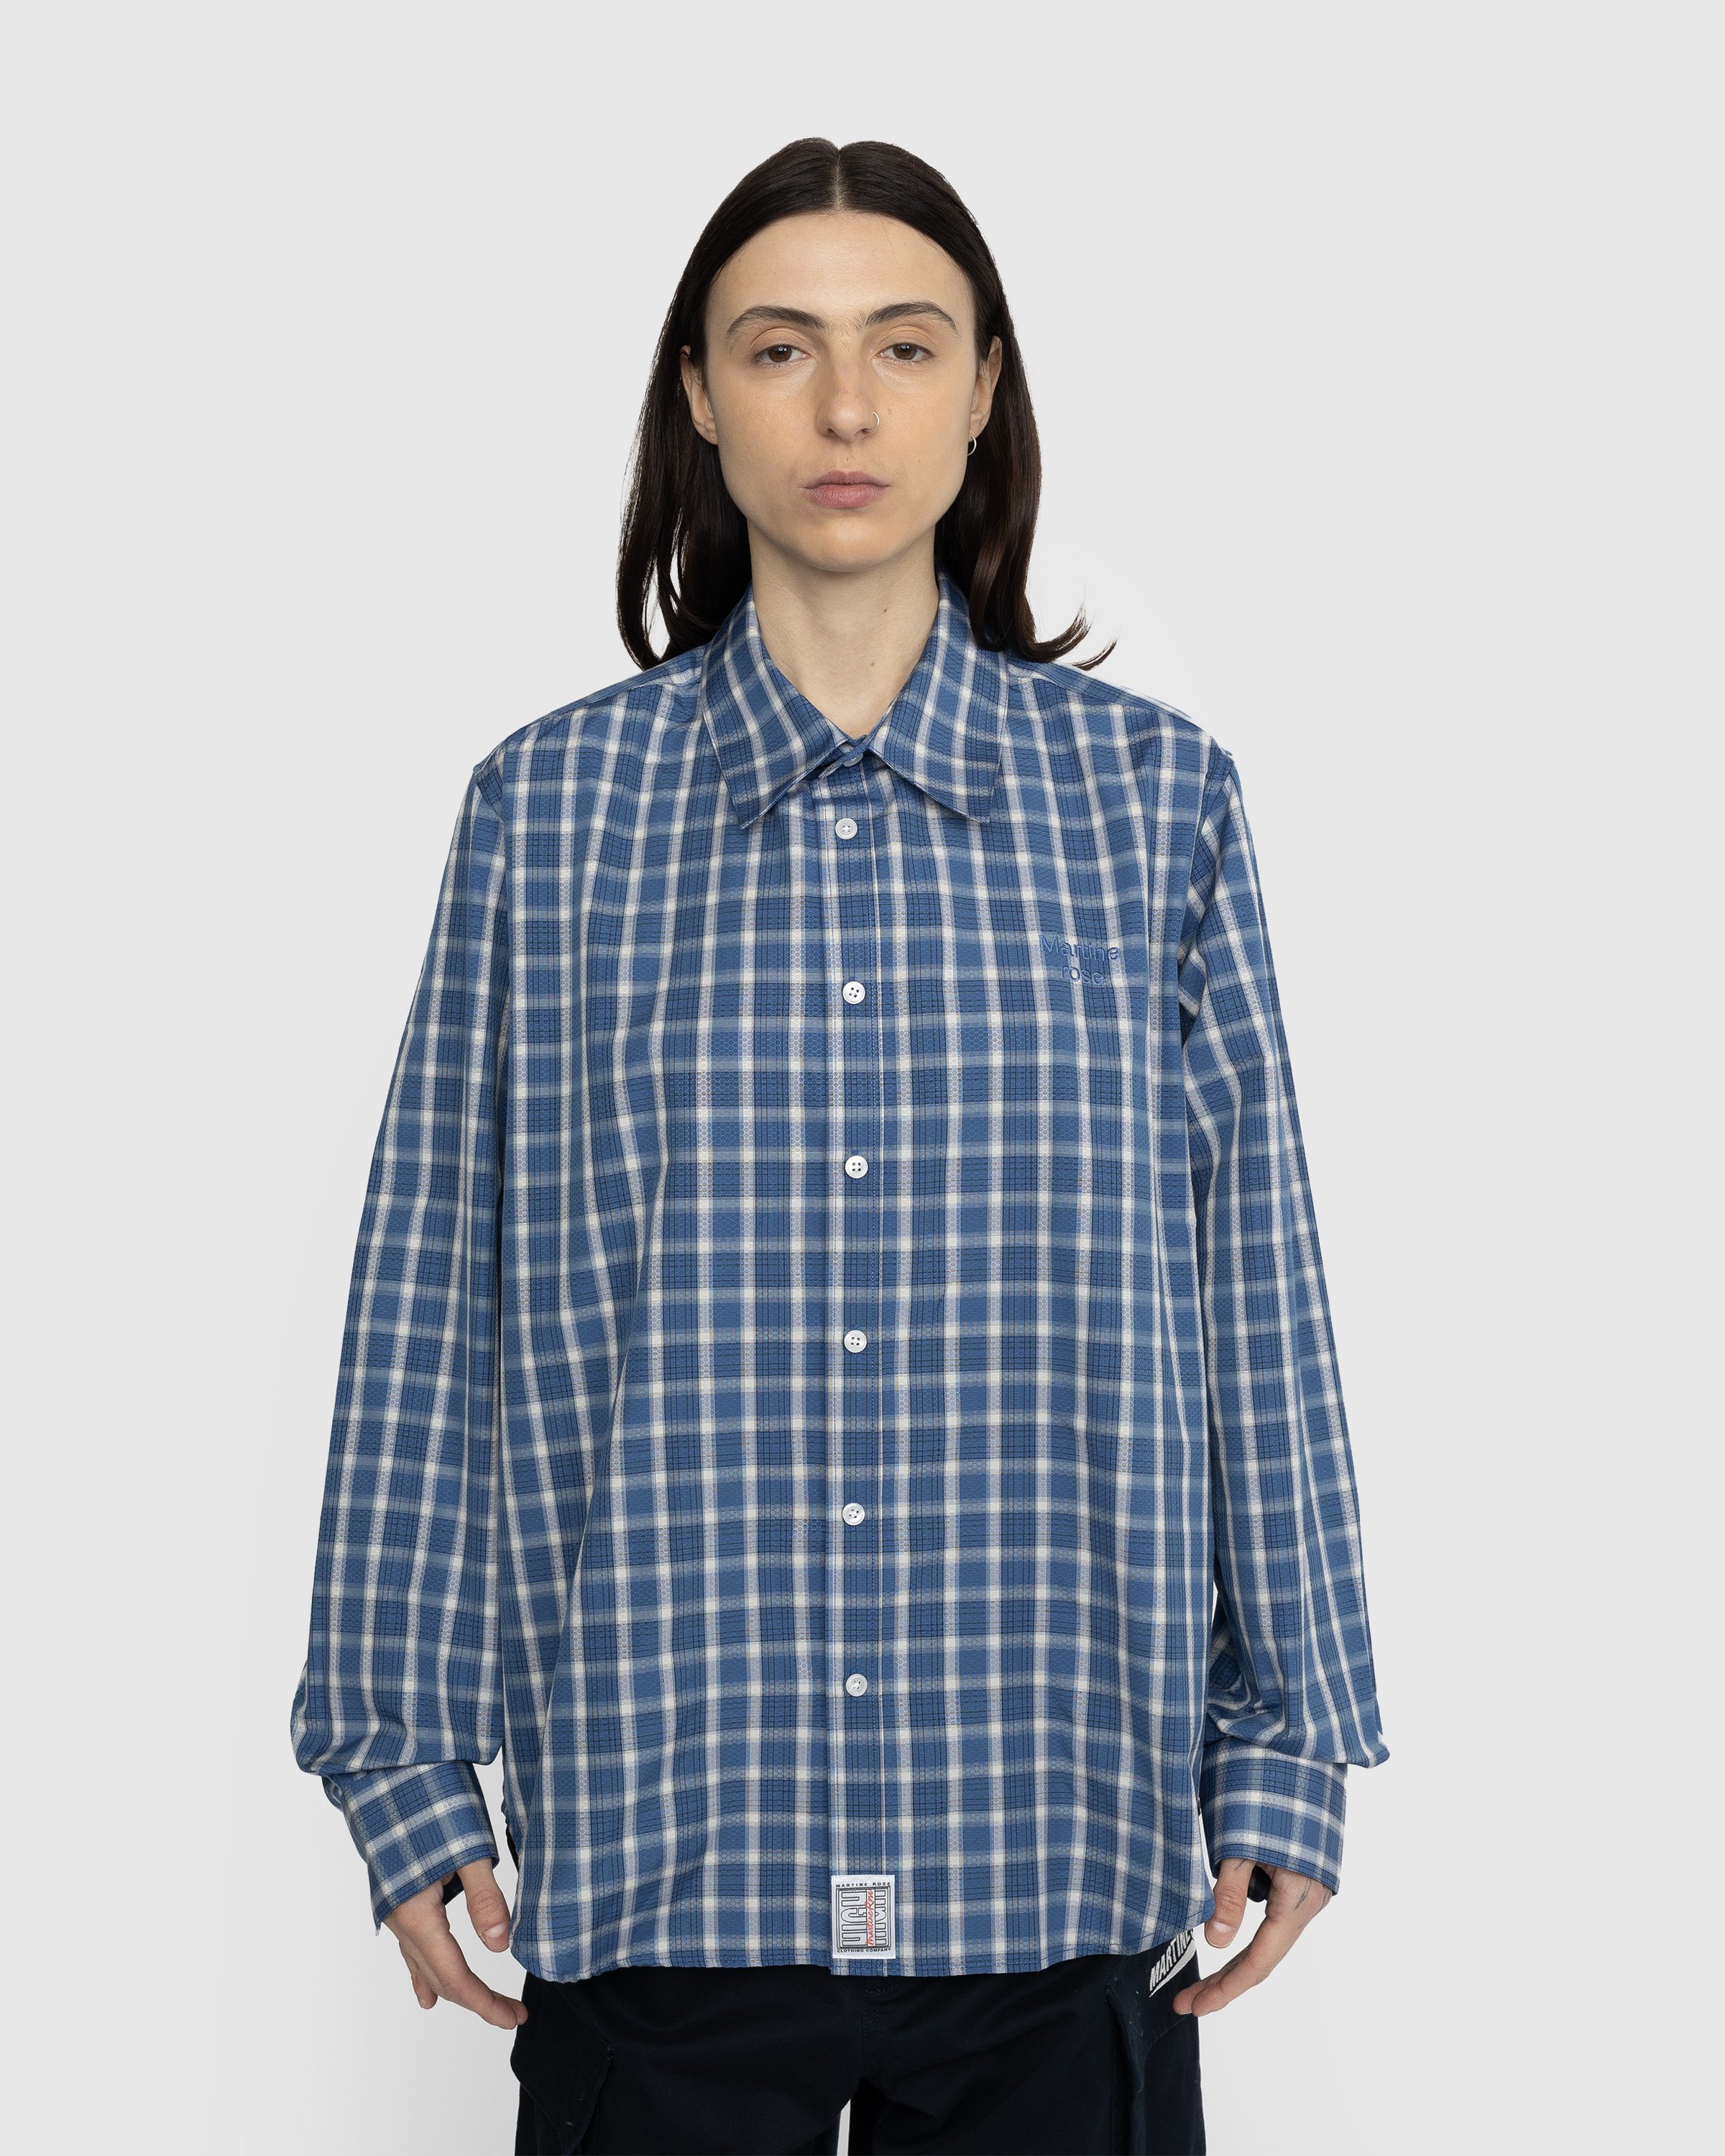 Martine Rose - Classic Check Button-Down Shirt Blue - Clothing - Blue - Image 2